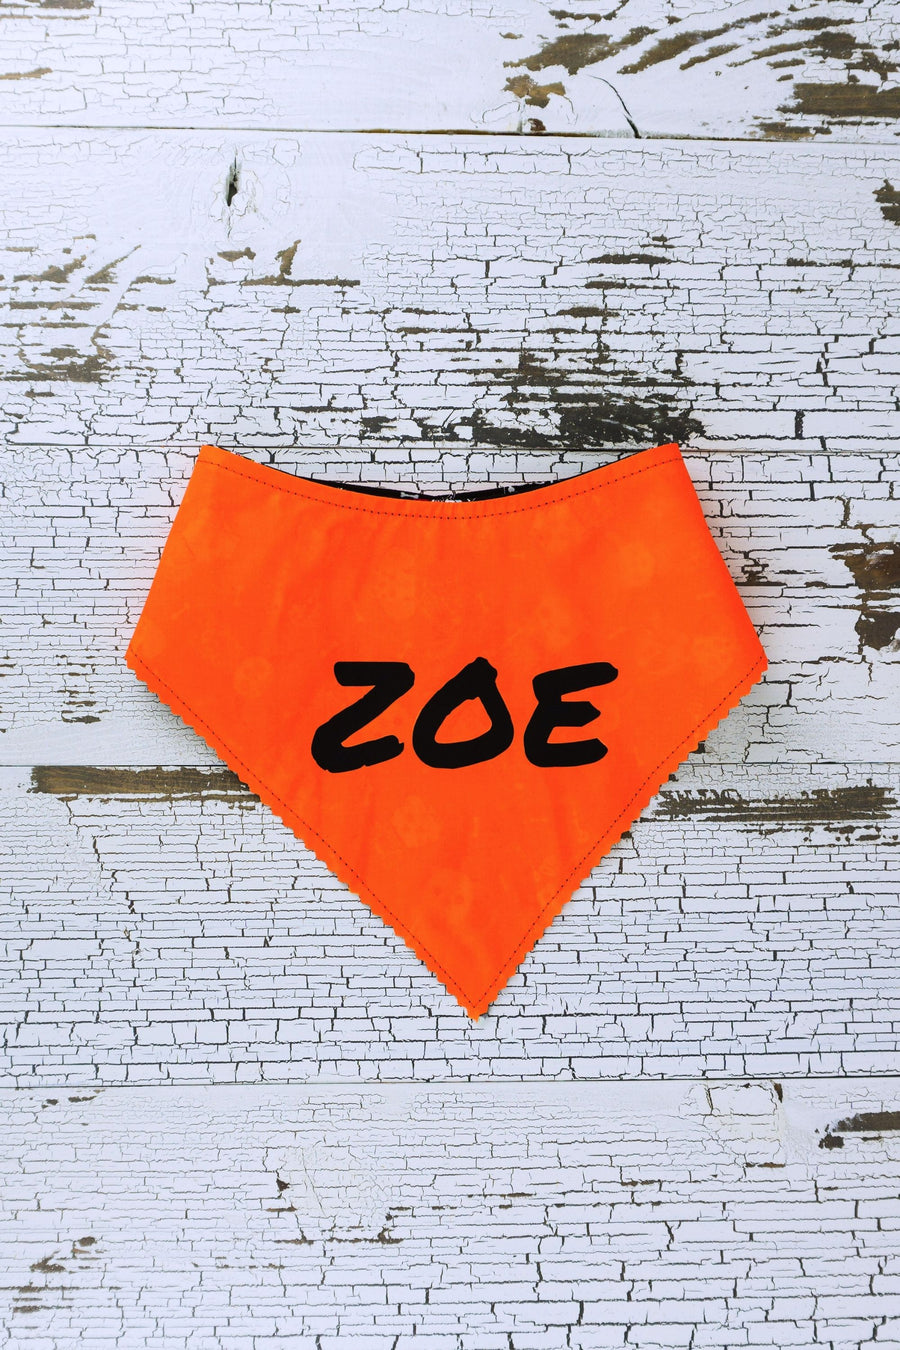 Personalize your reflective bandana with text up to 16 characters. Image shows the name Zoe in black on an orange bandana.